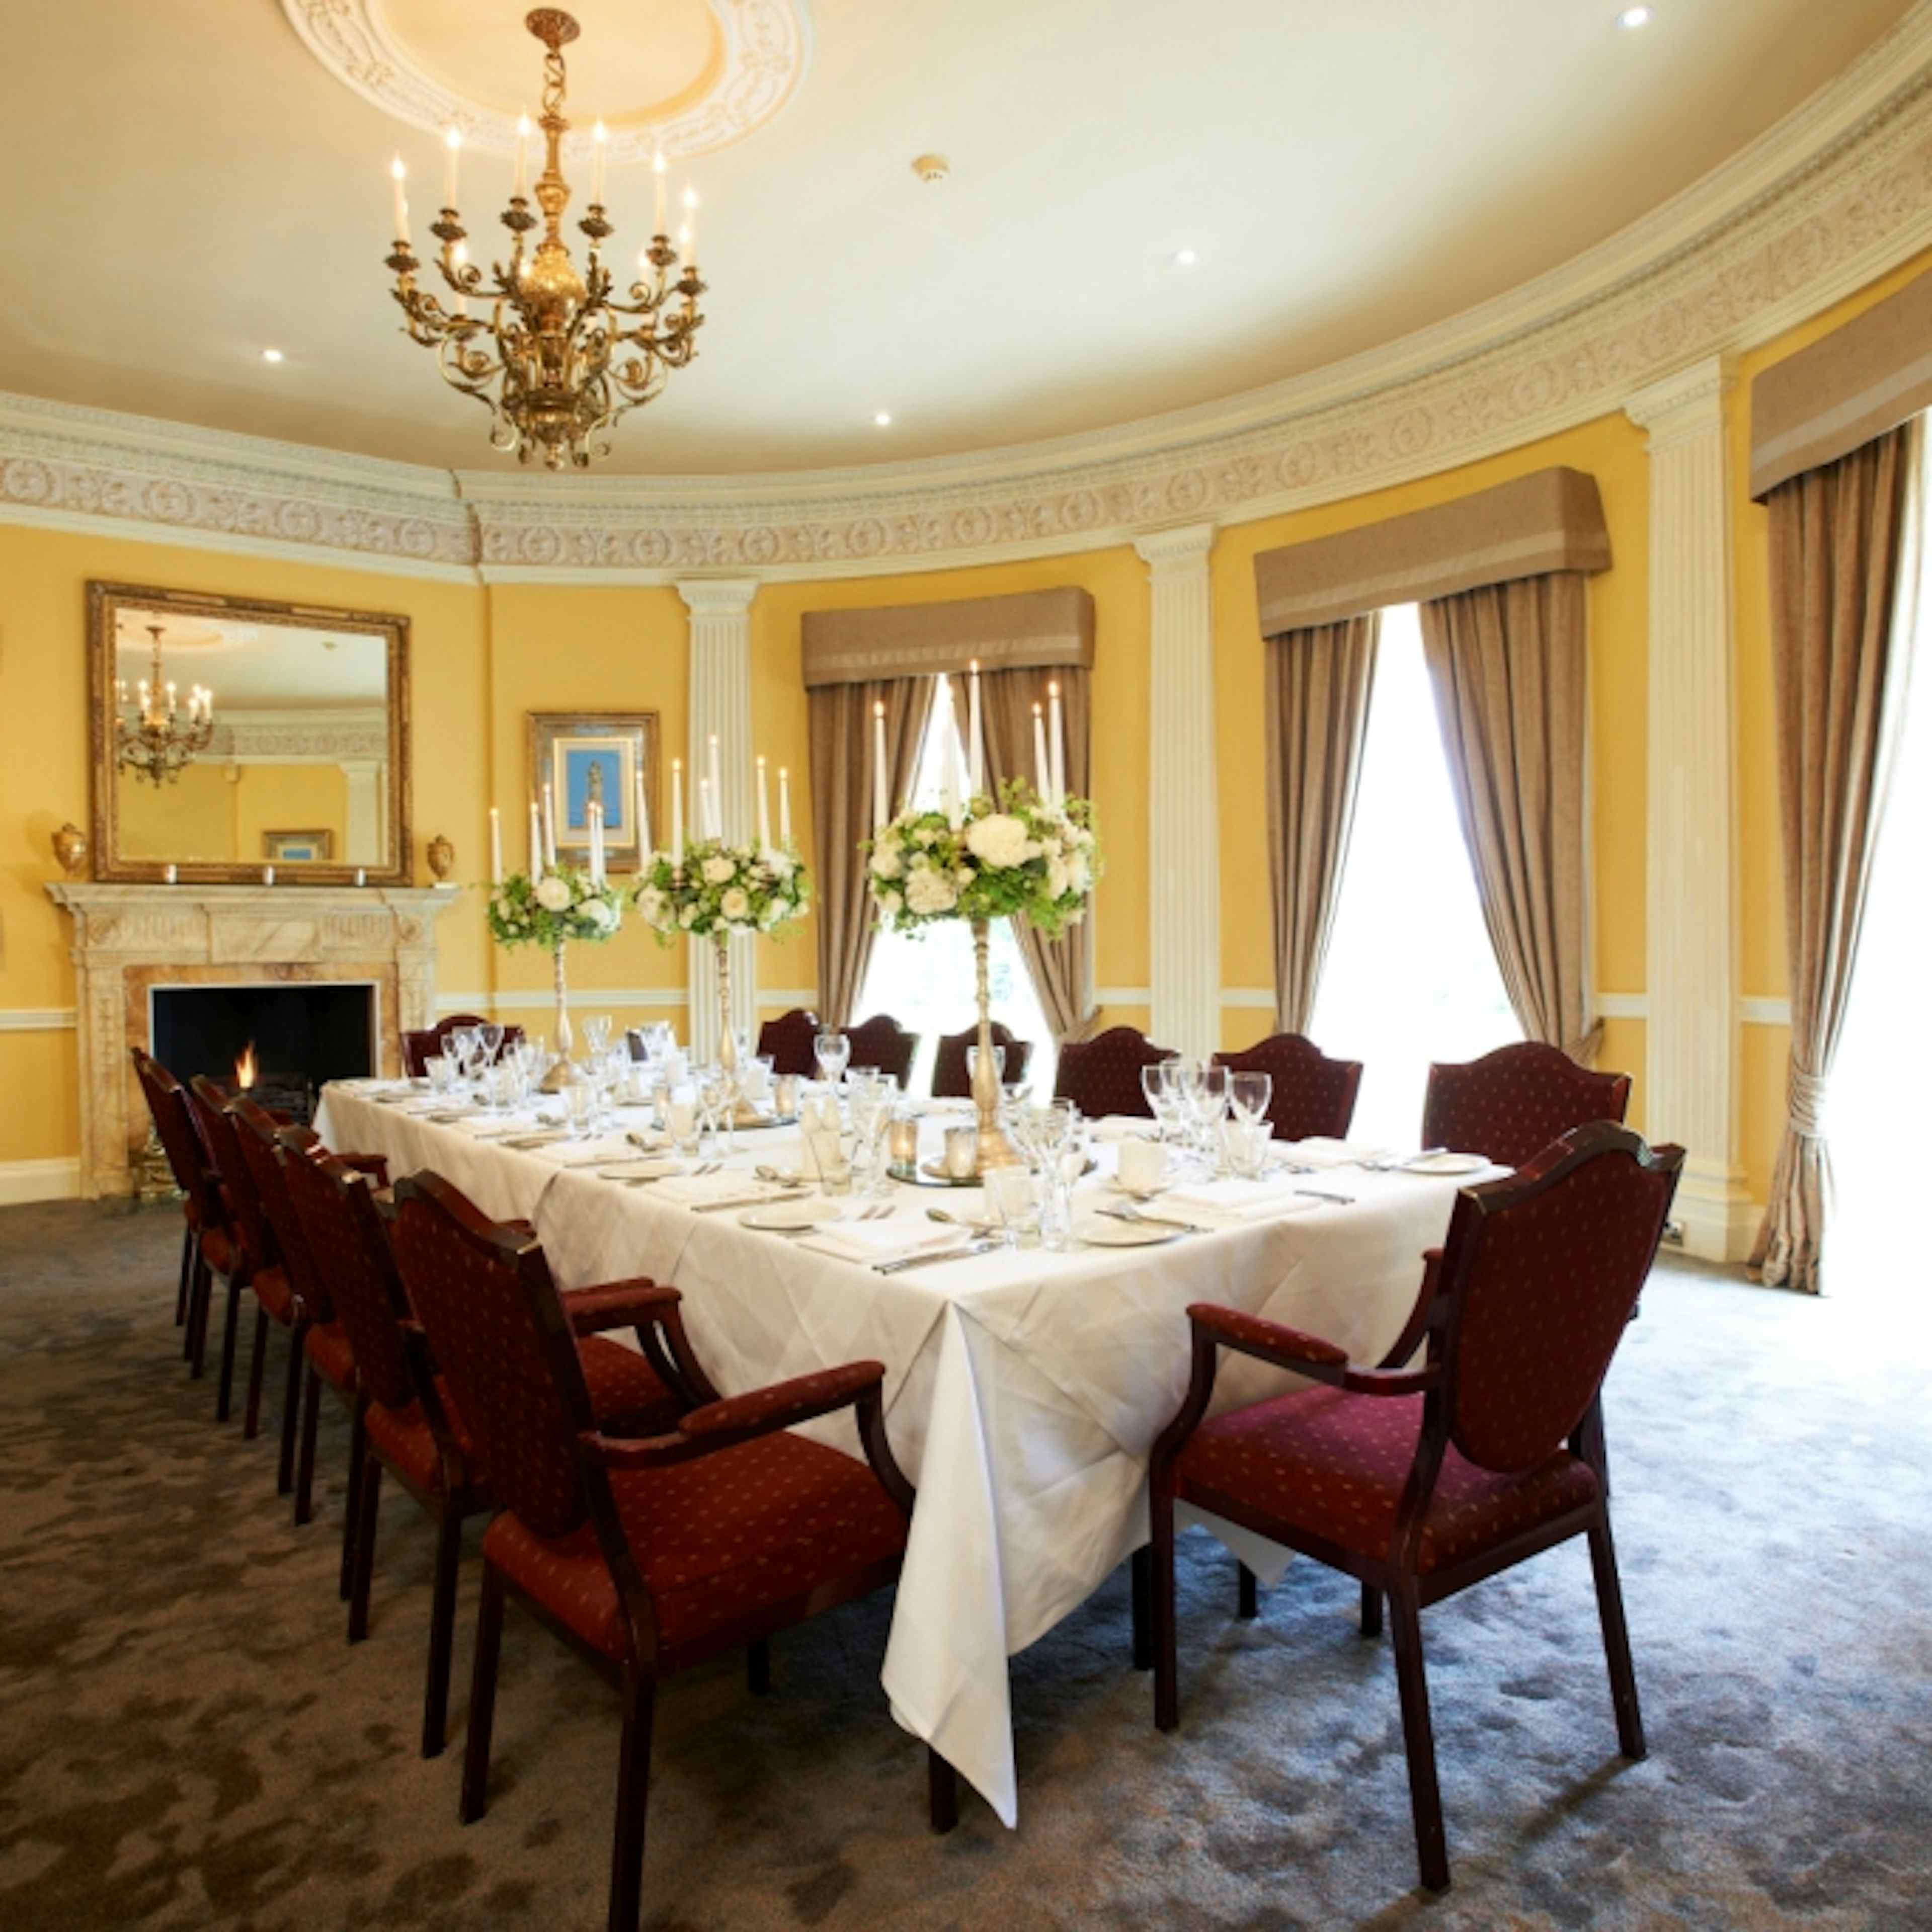 Stoke Park Country Club, Spa and Hotel - Function Rooms image 3